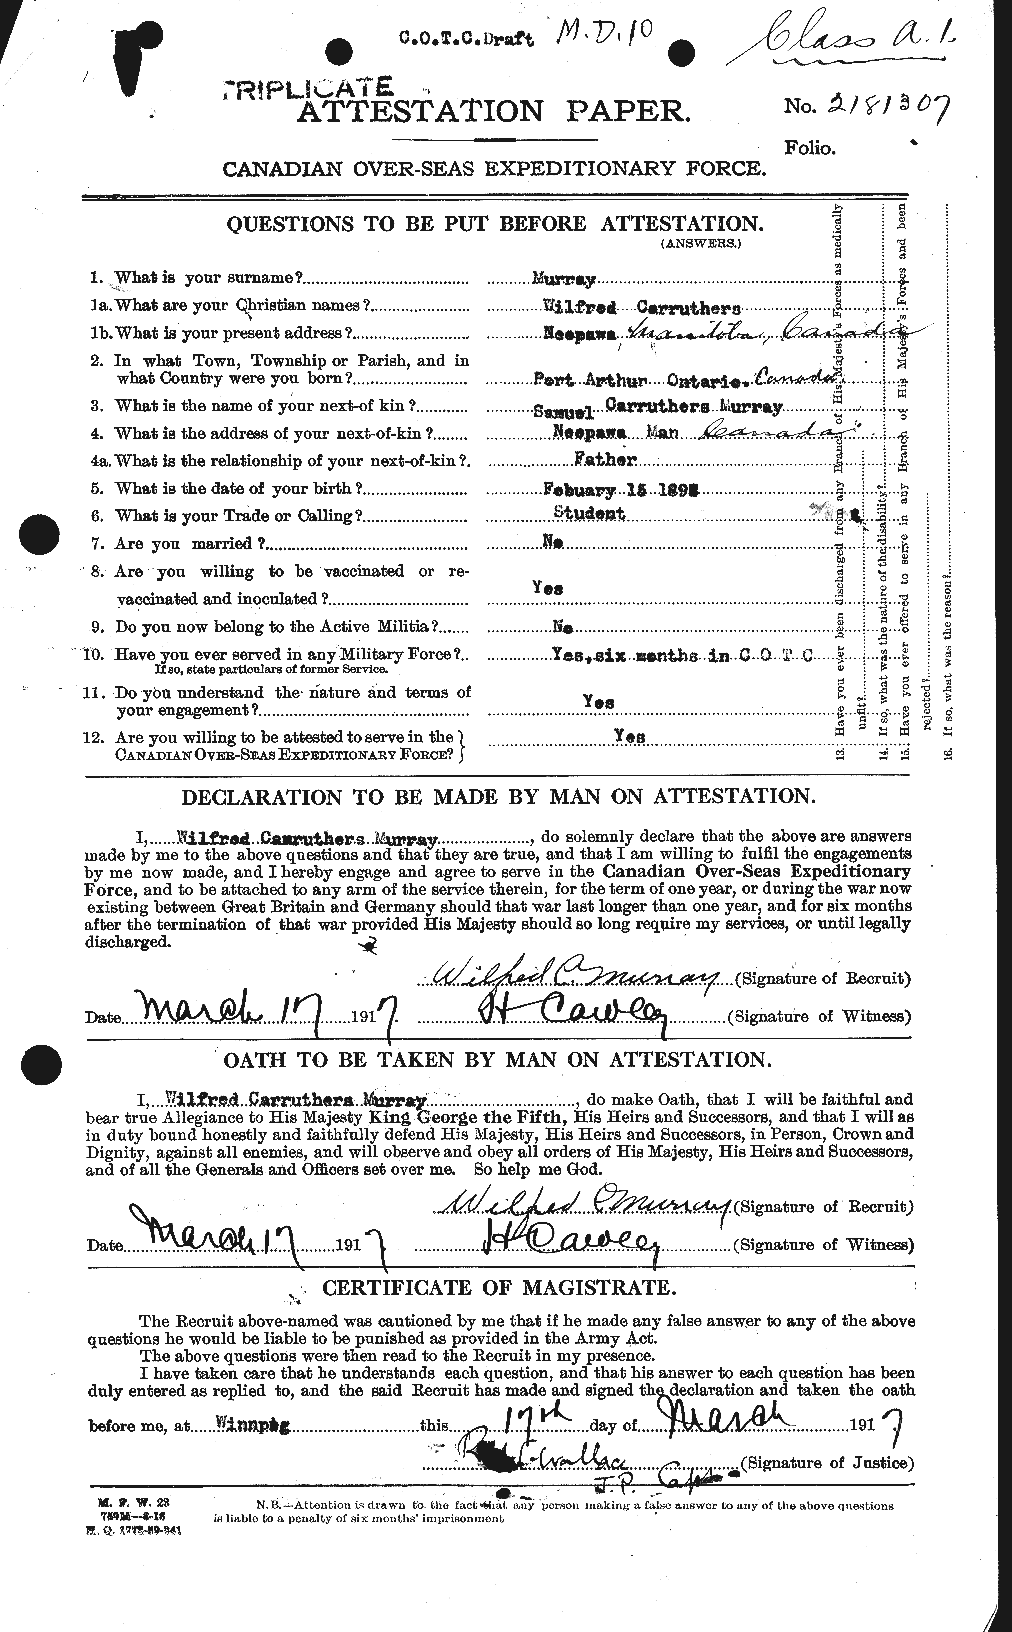 Personnel Records of the First World War - CEF 514212a